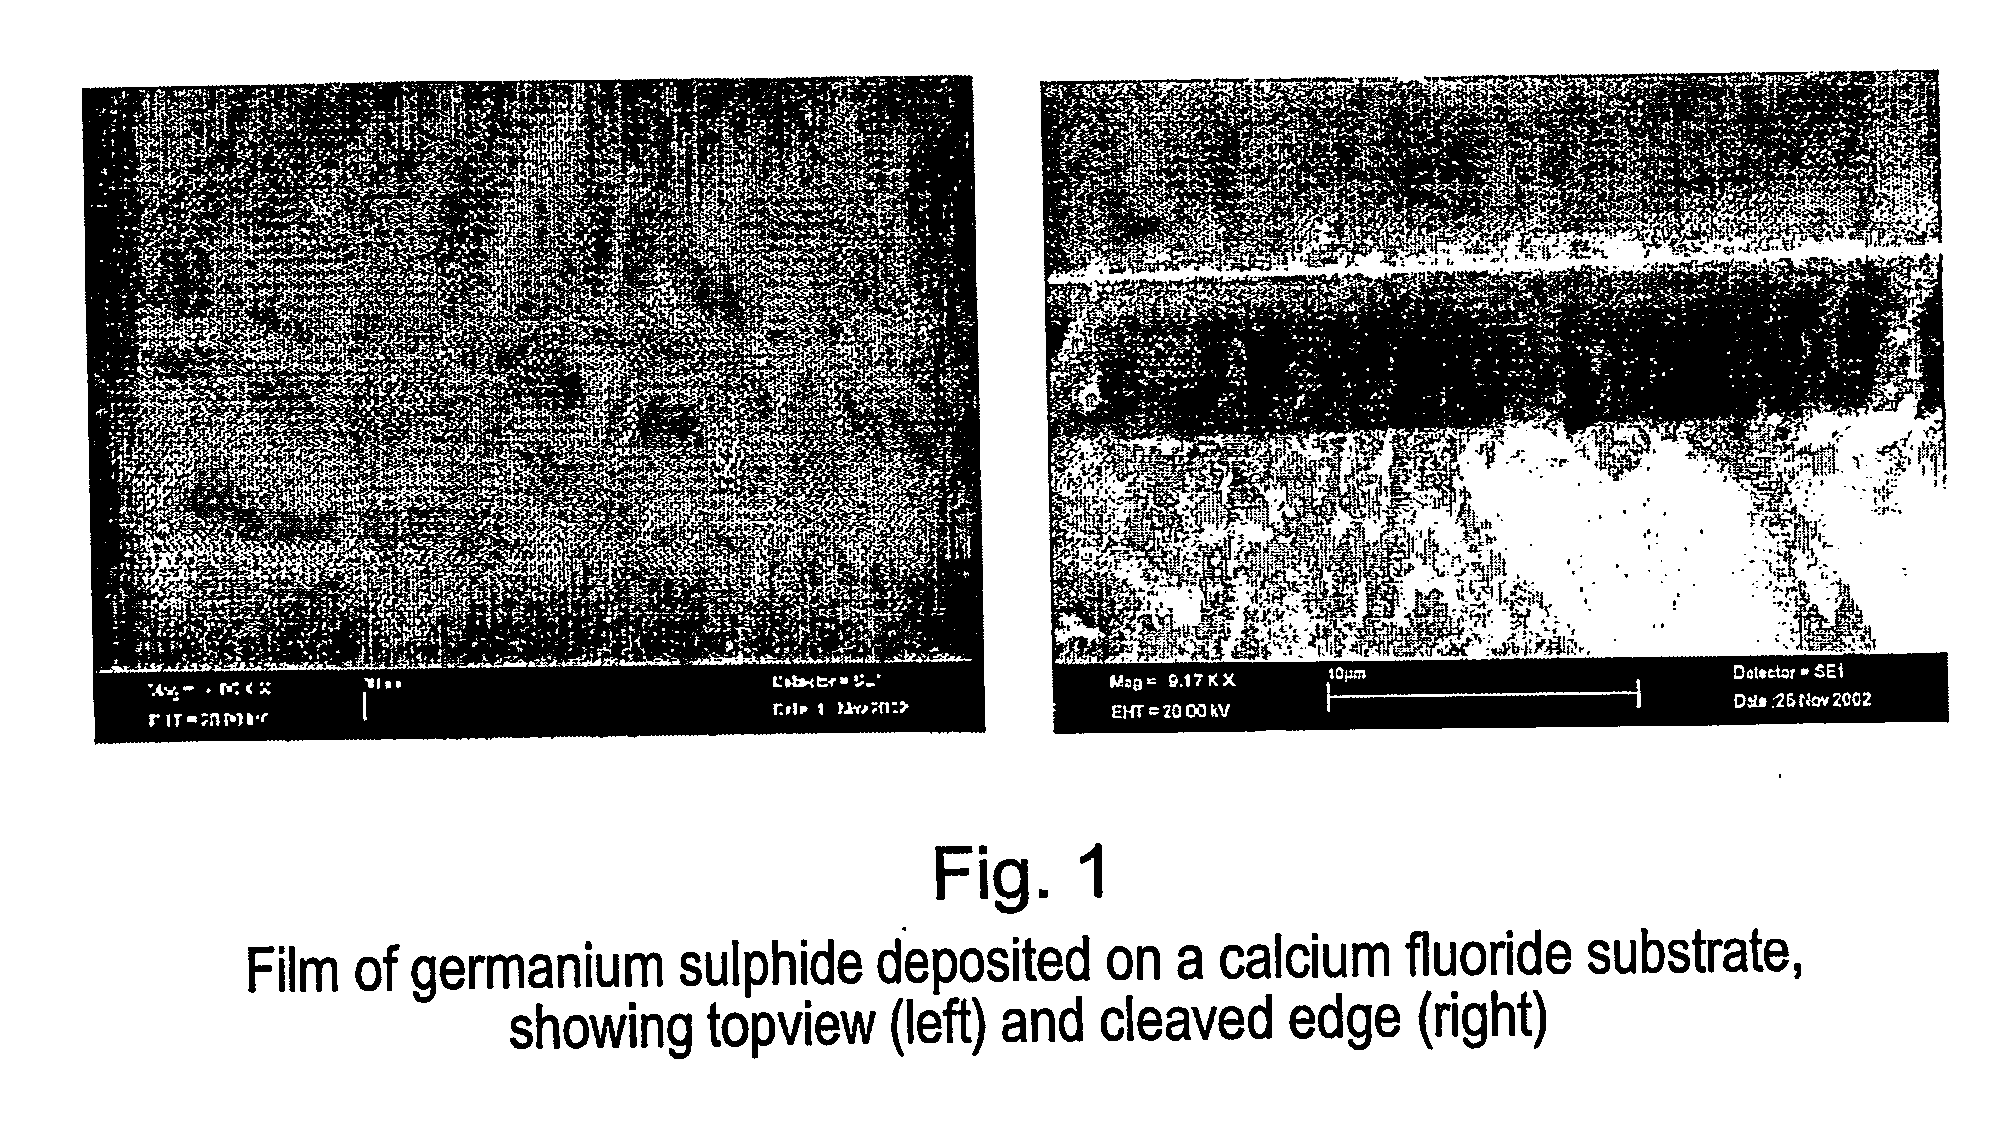 Synthesis of germanium sulphide and related compounds